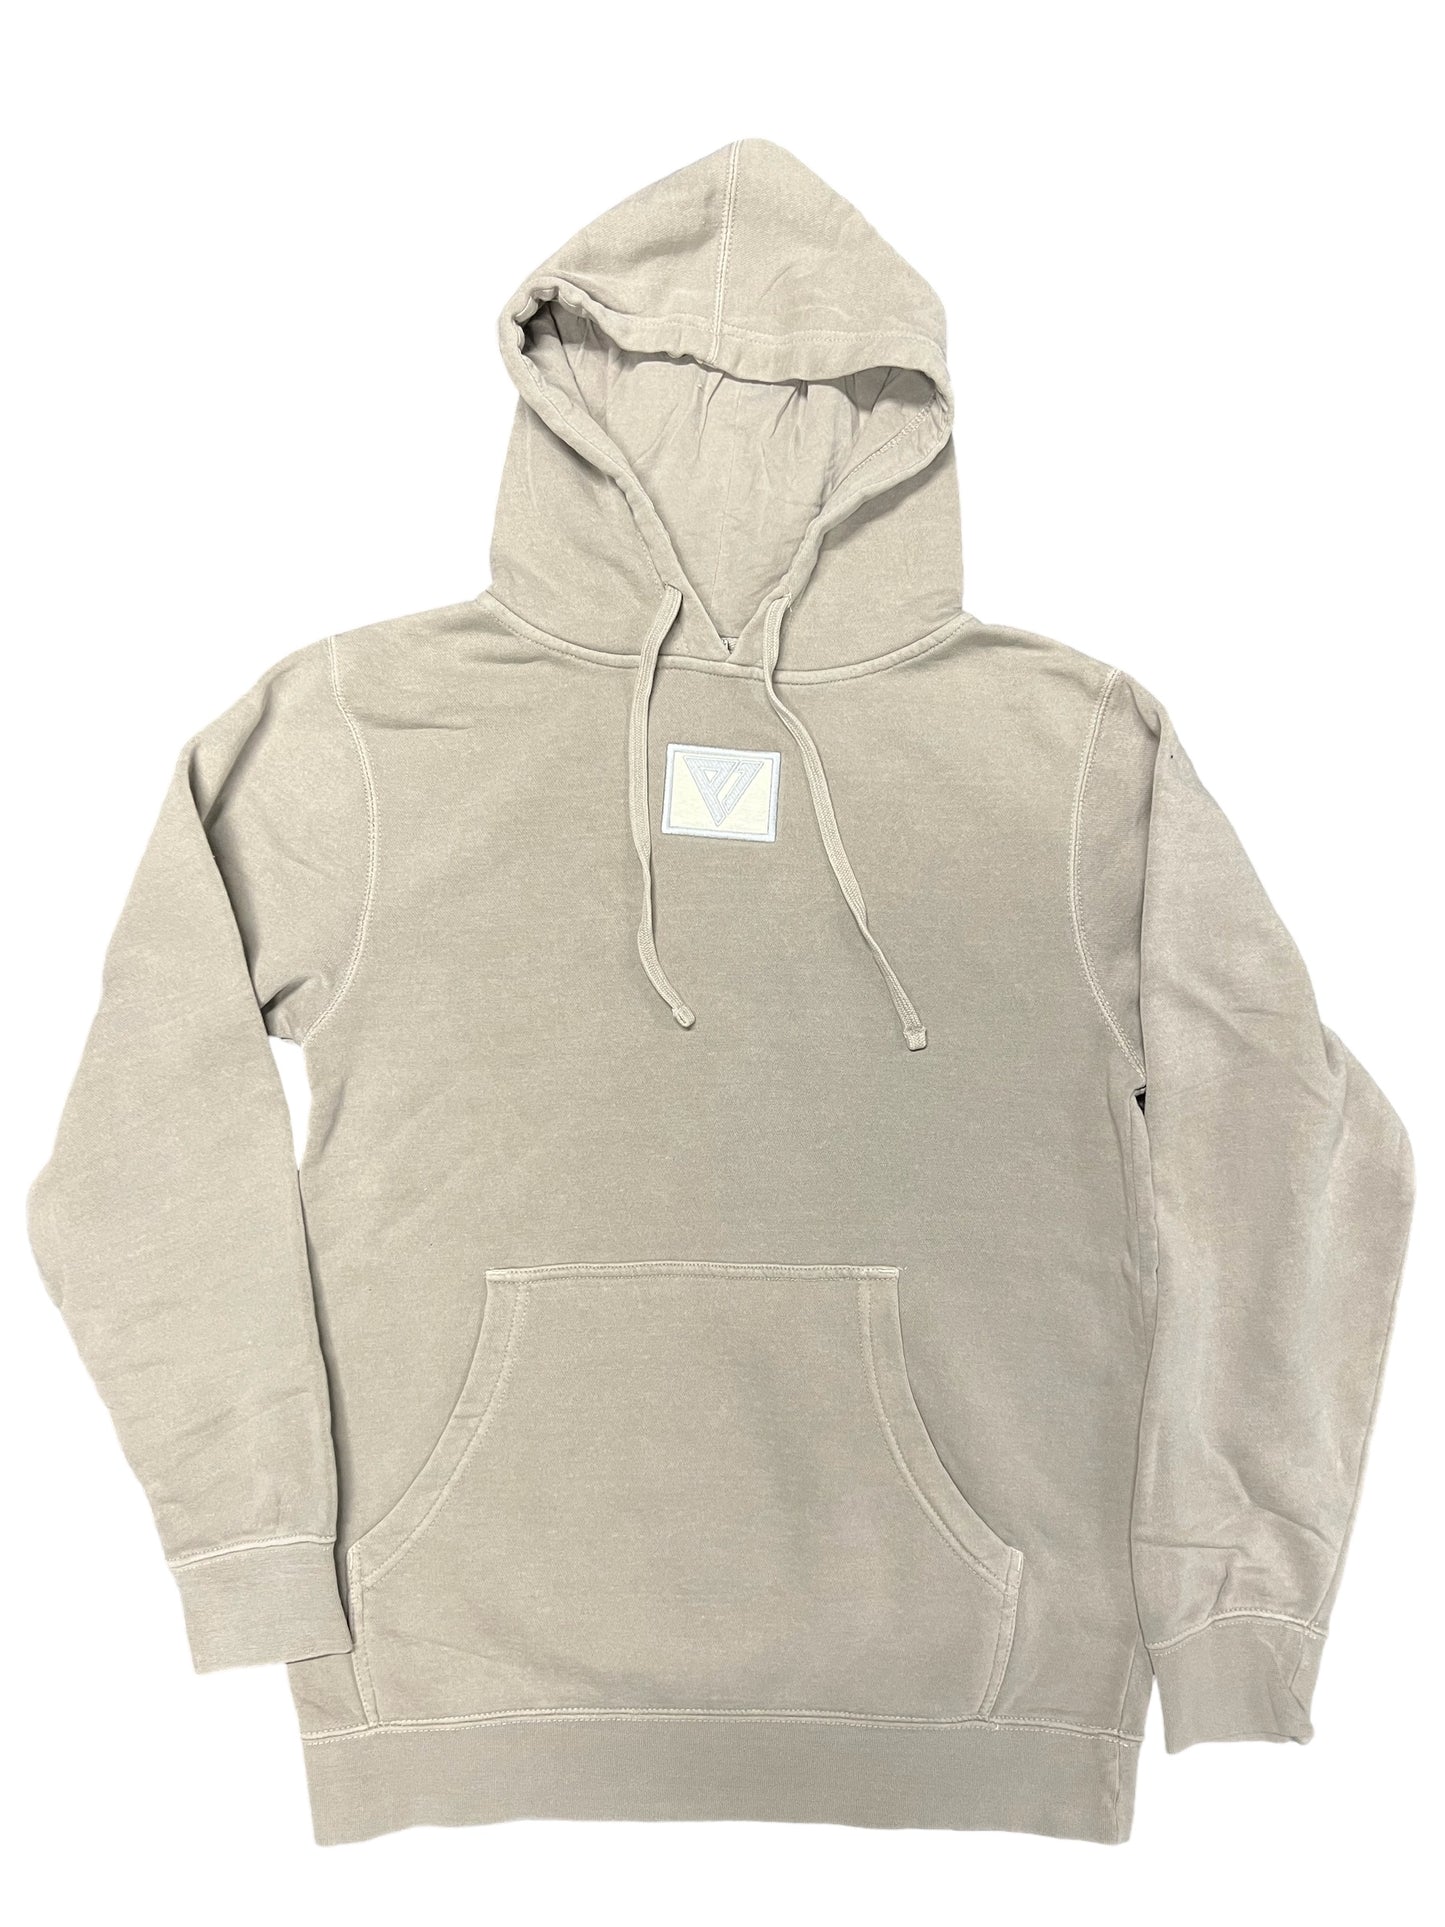 P1 Patch Hoodie